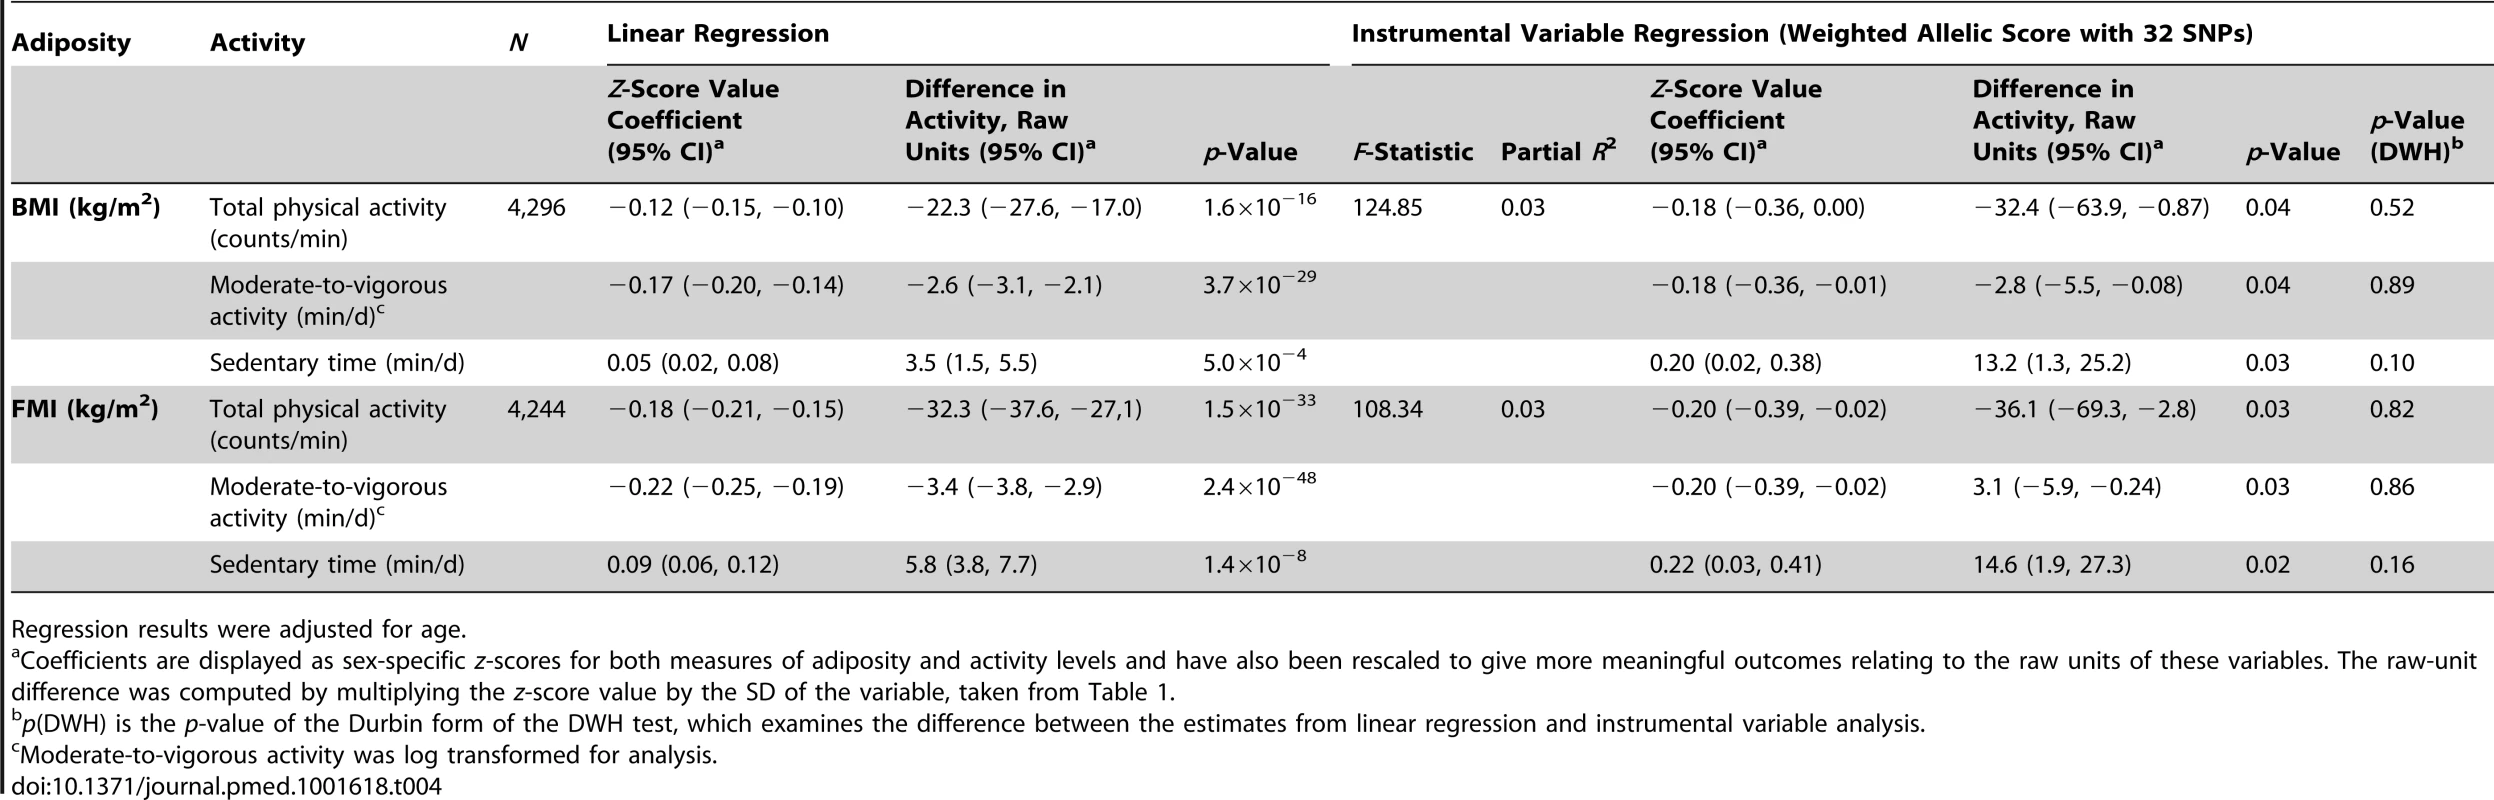 Associations between body mass index/fat mass index and activity levels as tested both by conventional epidemiological approaches and through the application of instrumental variable analysis using a 32-SNP weighted allelic score as an instrument.